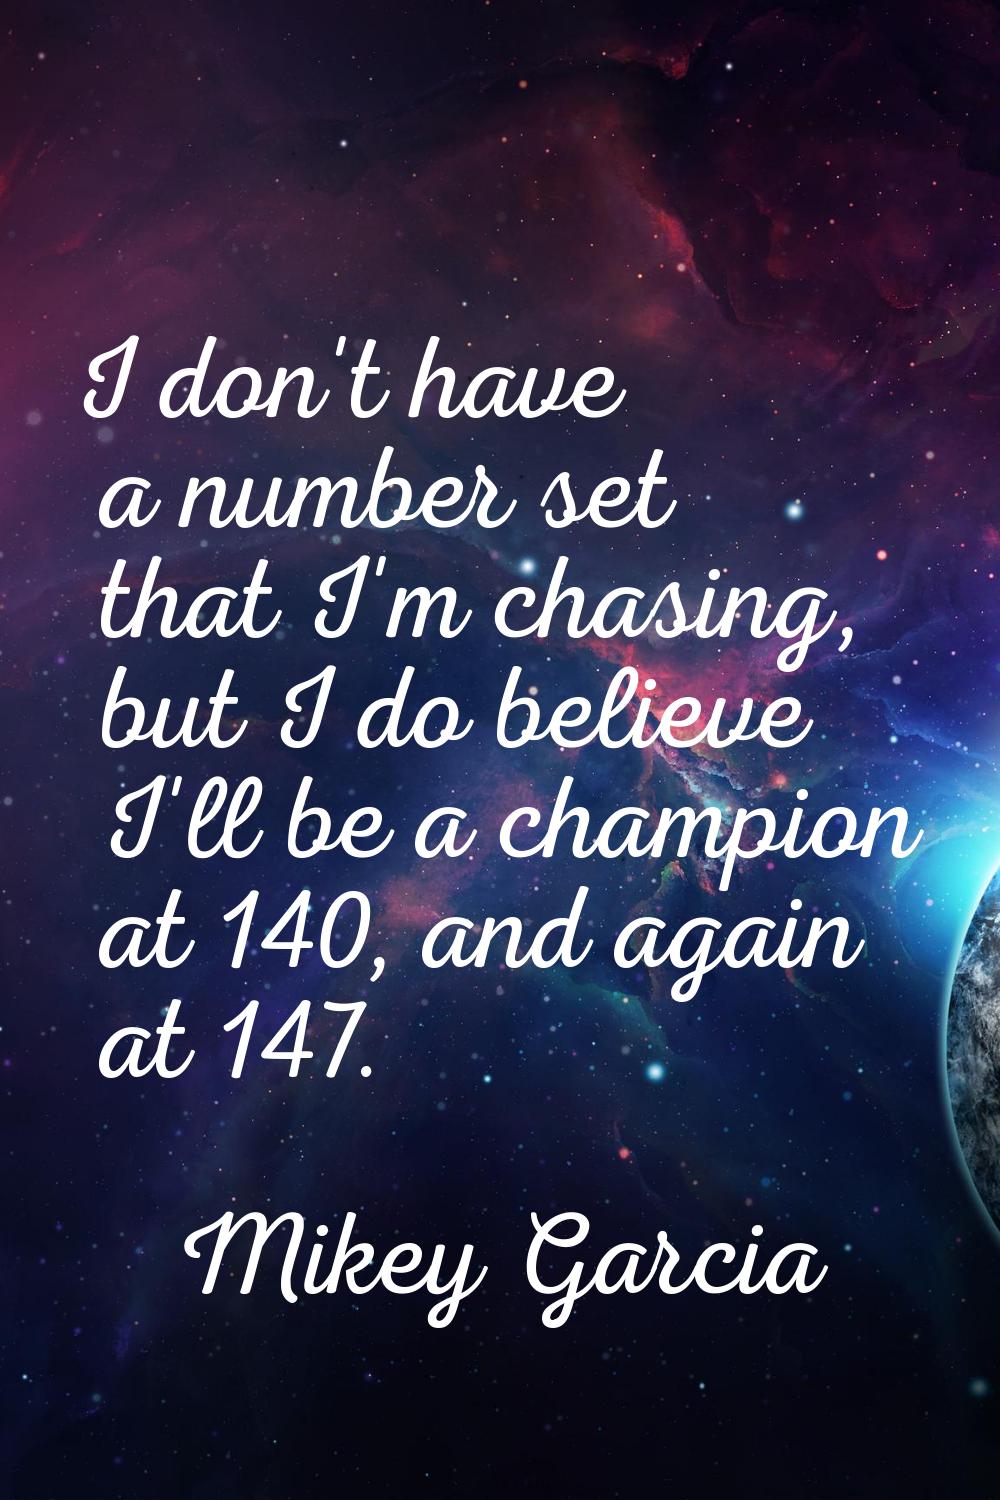 I don't have a number set that I'm chasing, but I do believe I'll be a champion at 140, and again a